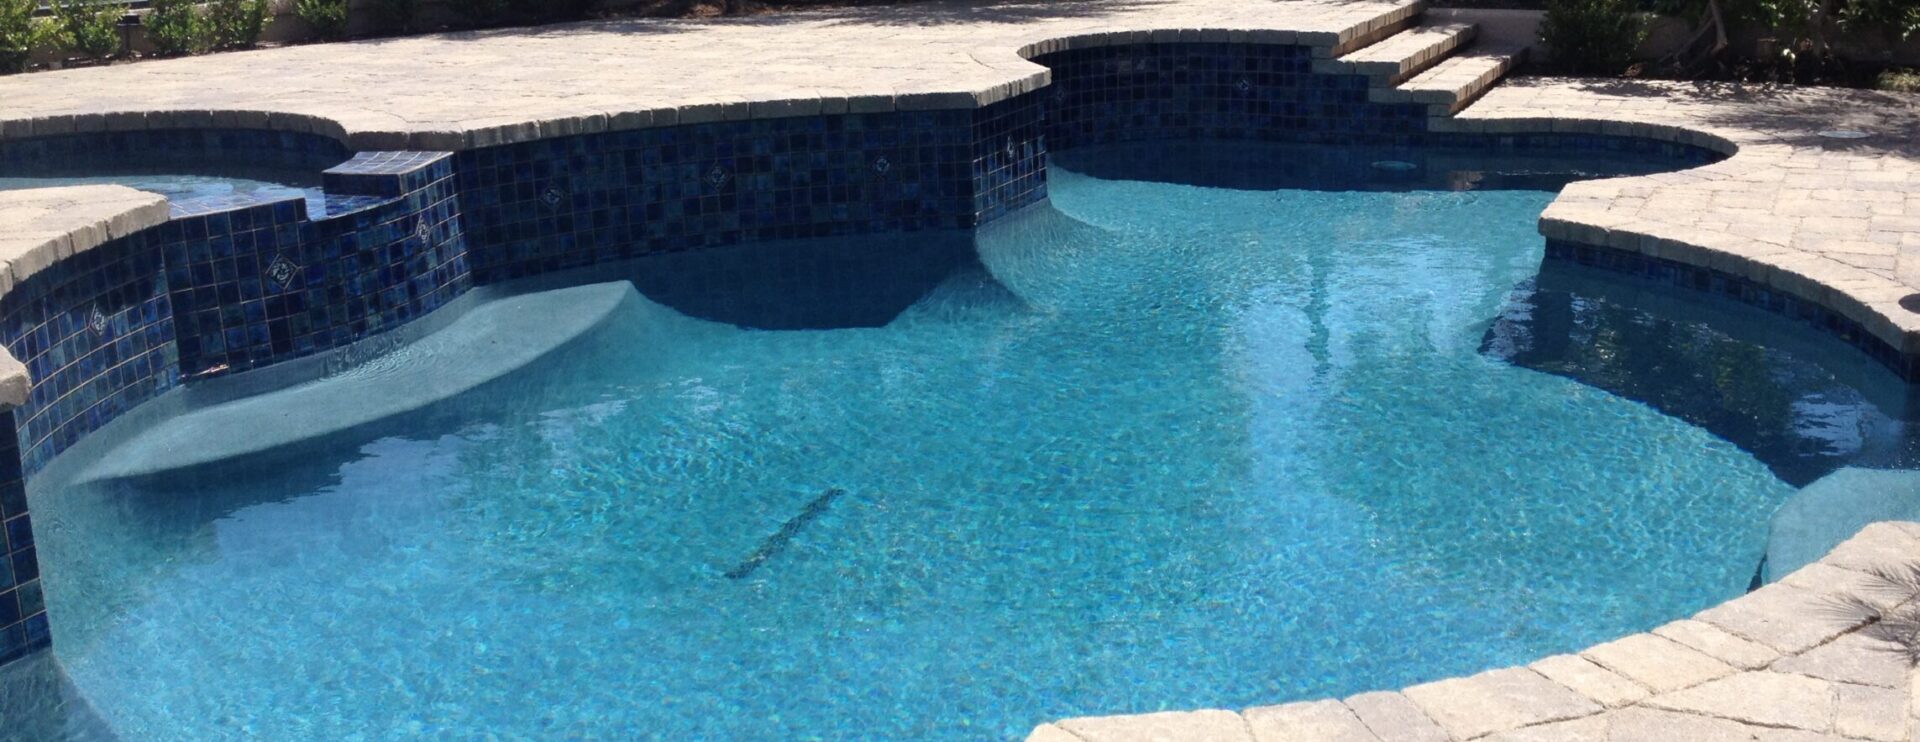 Alan Smith Pool Plastering & Remodeling|Midnight Microfusion